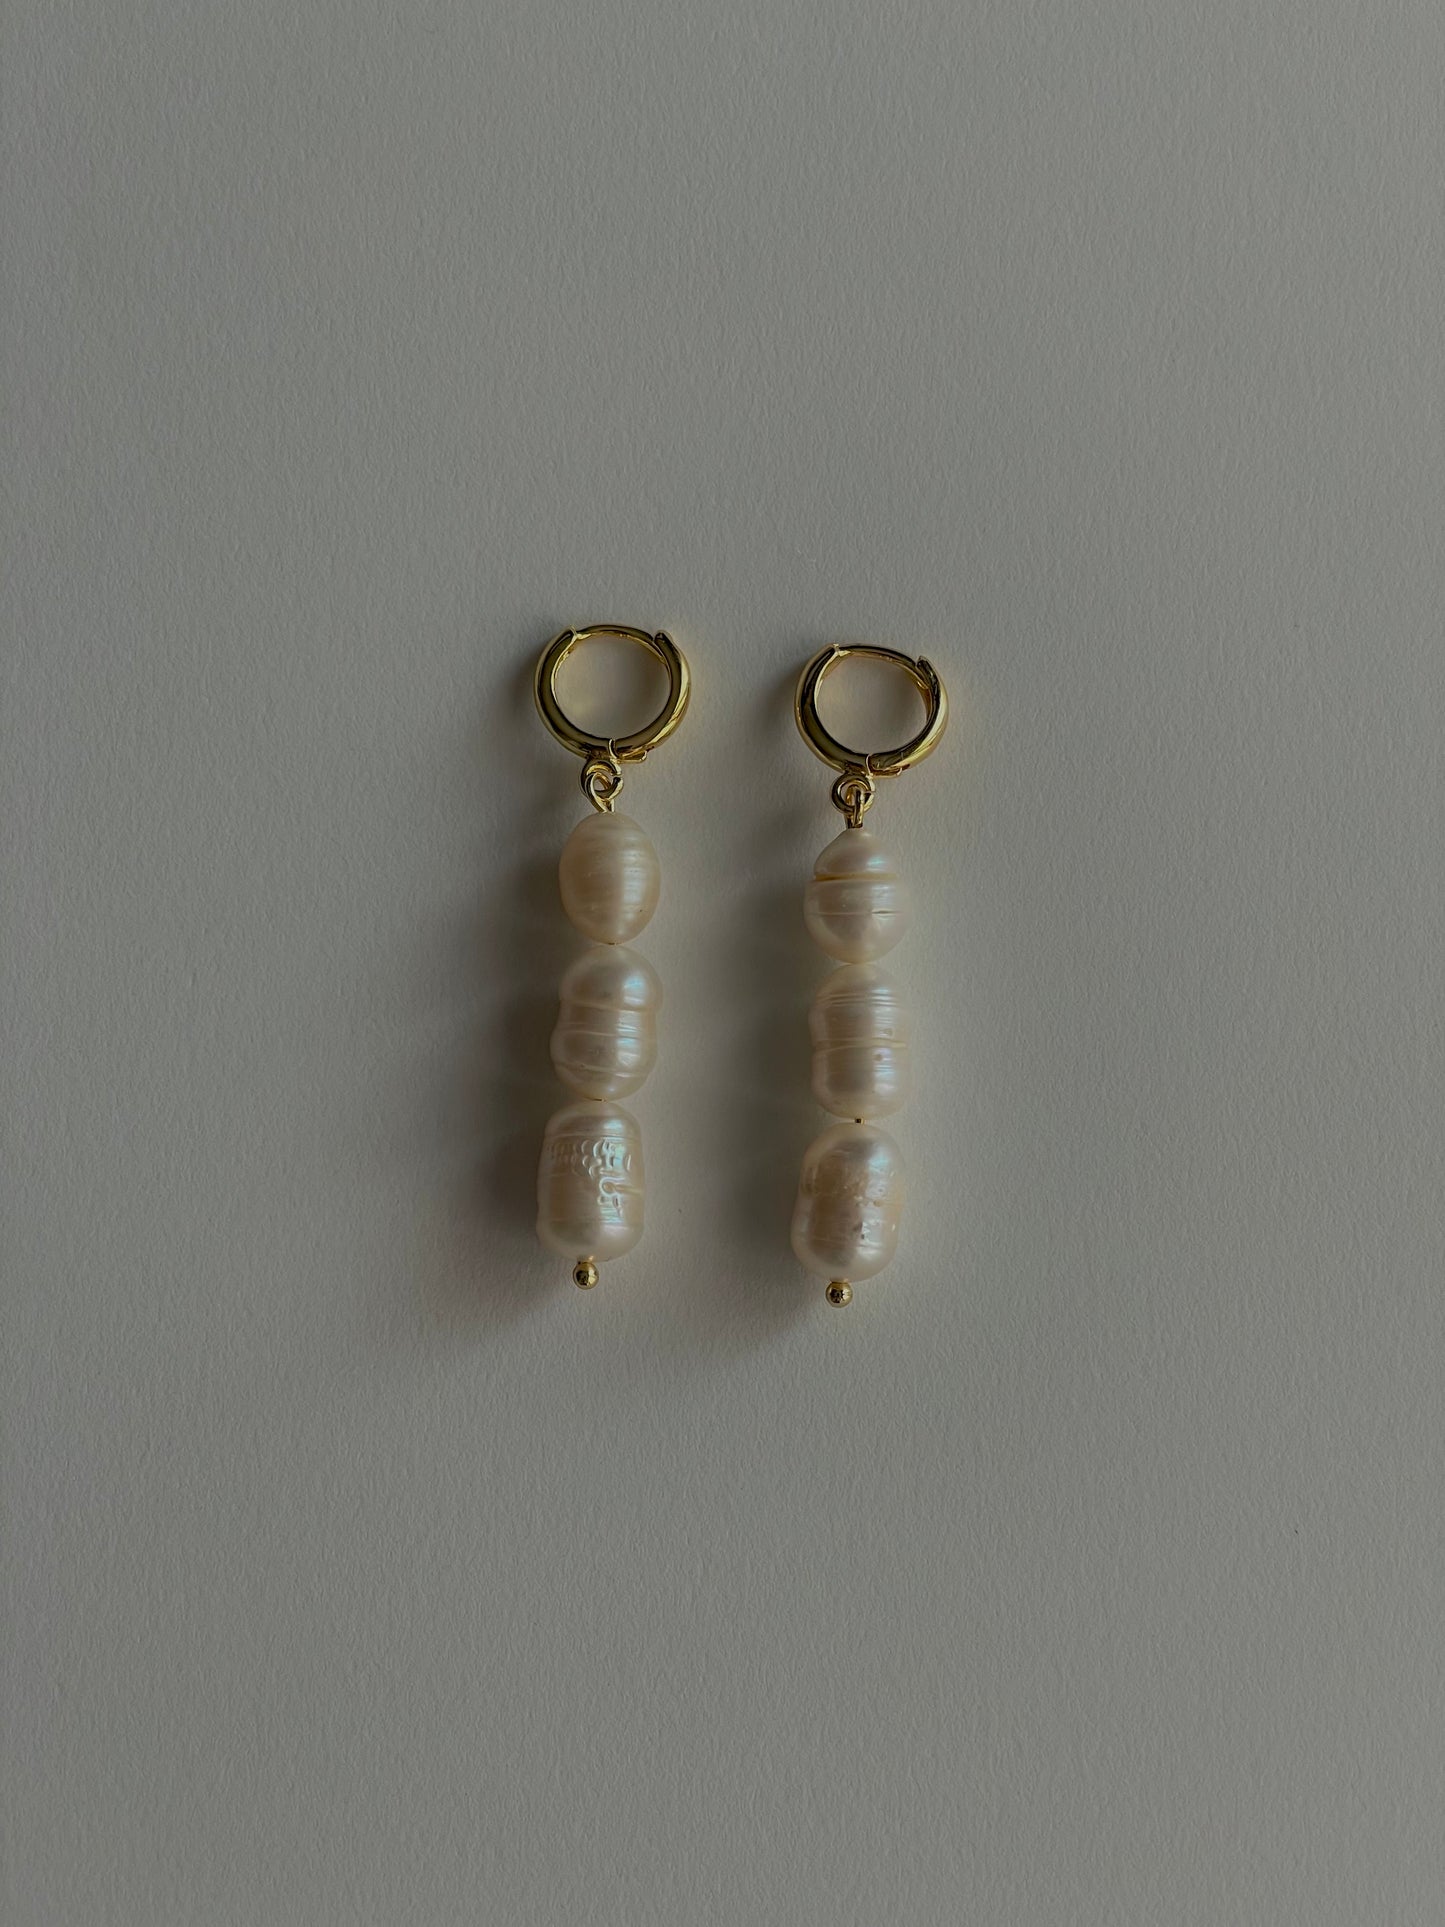 Cultivated pearl earrings